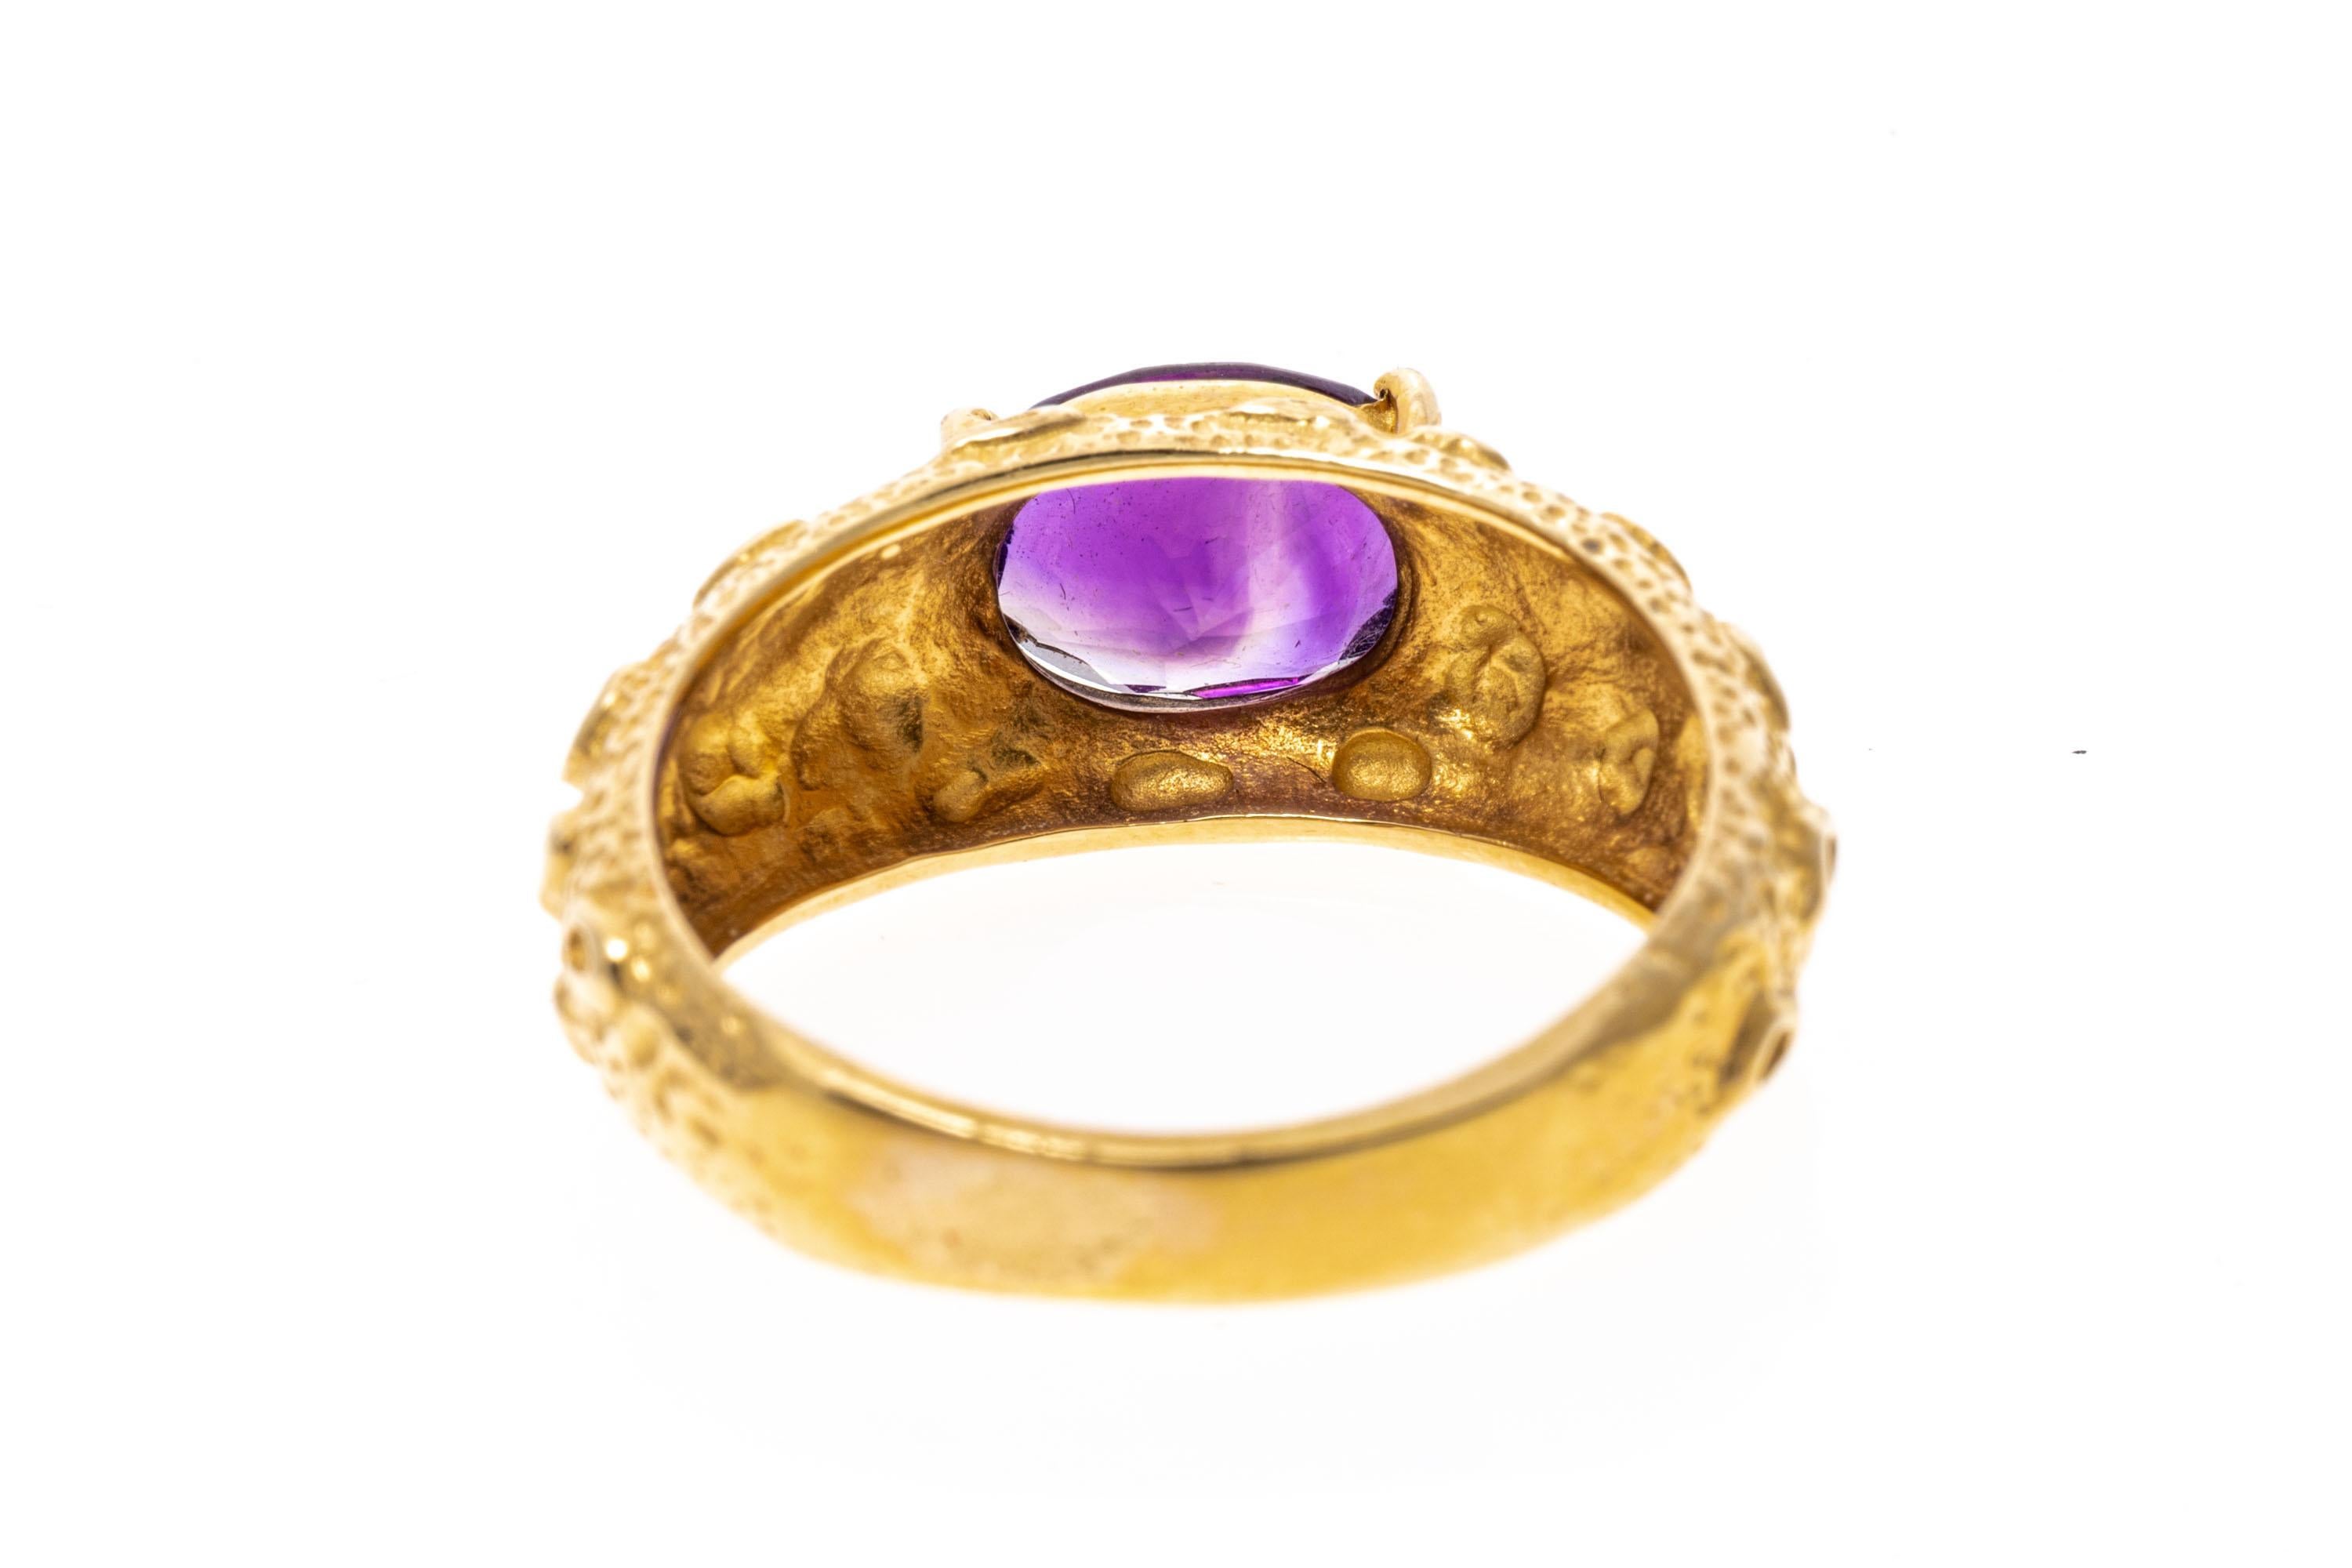 14k yellow gold ring. This striking ring has a horizontal, oval faceted, medium to dark purple color amethyst, approximately 1.42 CTS, prong set into a unique, moon crater style finished wide mounting.
Marks: 14k
Dimensions: 5/16